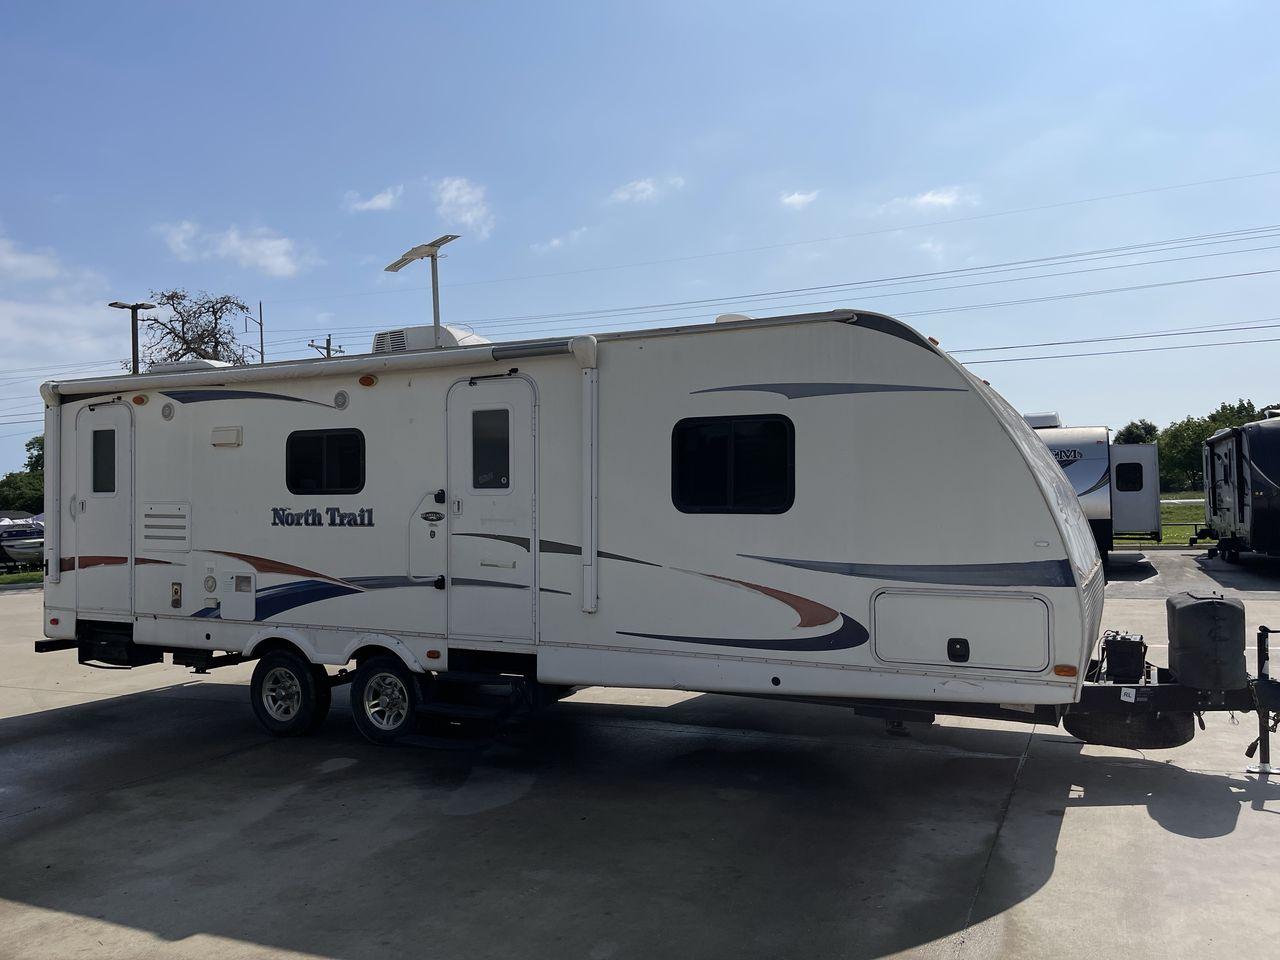 2011 WHITE HEARTLAND NORTH TRAIL 26B (5SFNB3225BE) , Length: 32.5 ft. | Dry Weight: 7,104 lbs. | Gross Weight: 8,600 lbs. | Slides: 2 transmission, located at 4319 N Main Street, Cleburne, TX, 76033, (817) 221-0660, 32.435829, -97.384178 - Enjoy a spontaneous weekend getaway in this 2011 Heartland North Trail 26BRSS Travel Trailer! It is a dual-axle steel wheel setup measuring 32.5 ft. in length and 10.83 ft. in height. It has a dry weight of 7,104 lbs. and a GVWR of 8,600 lbs. It is equipped with automatic heating and cooling rated a - Photo #21